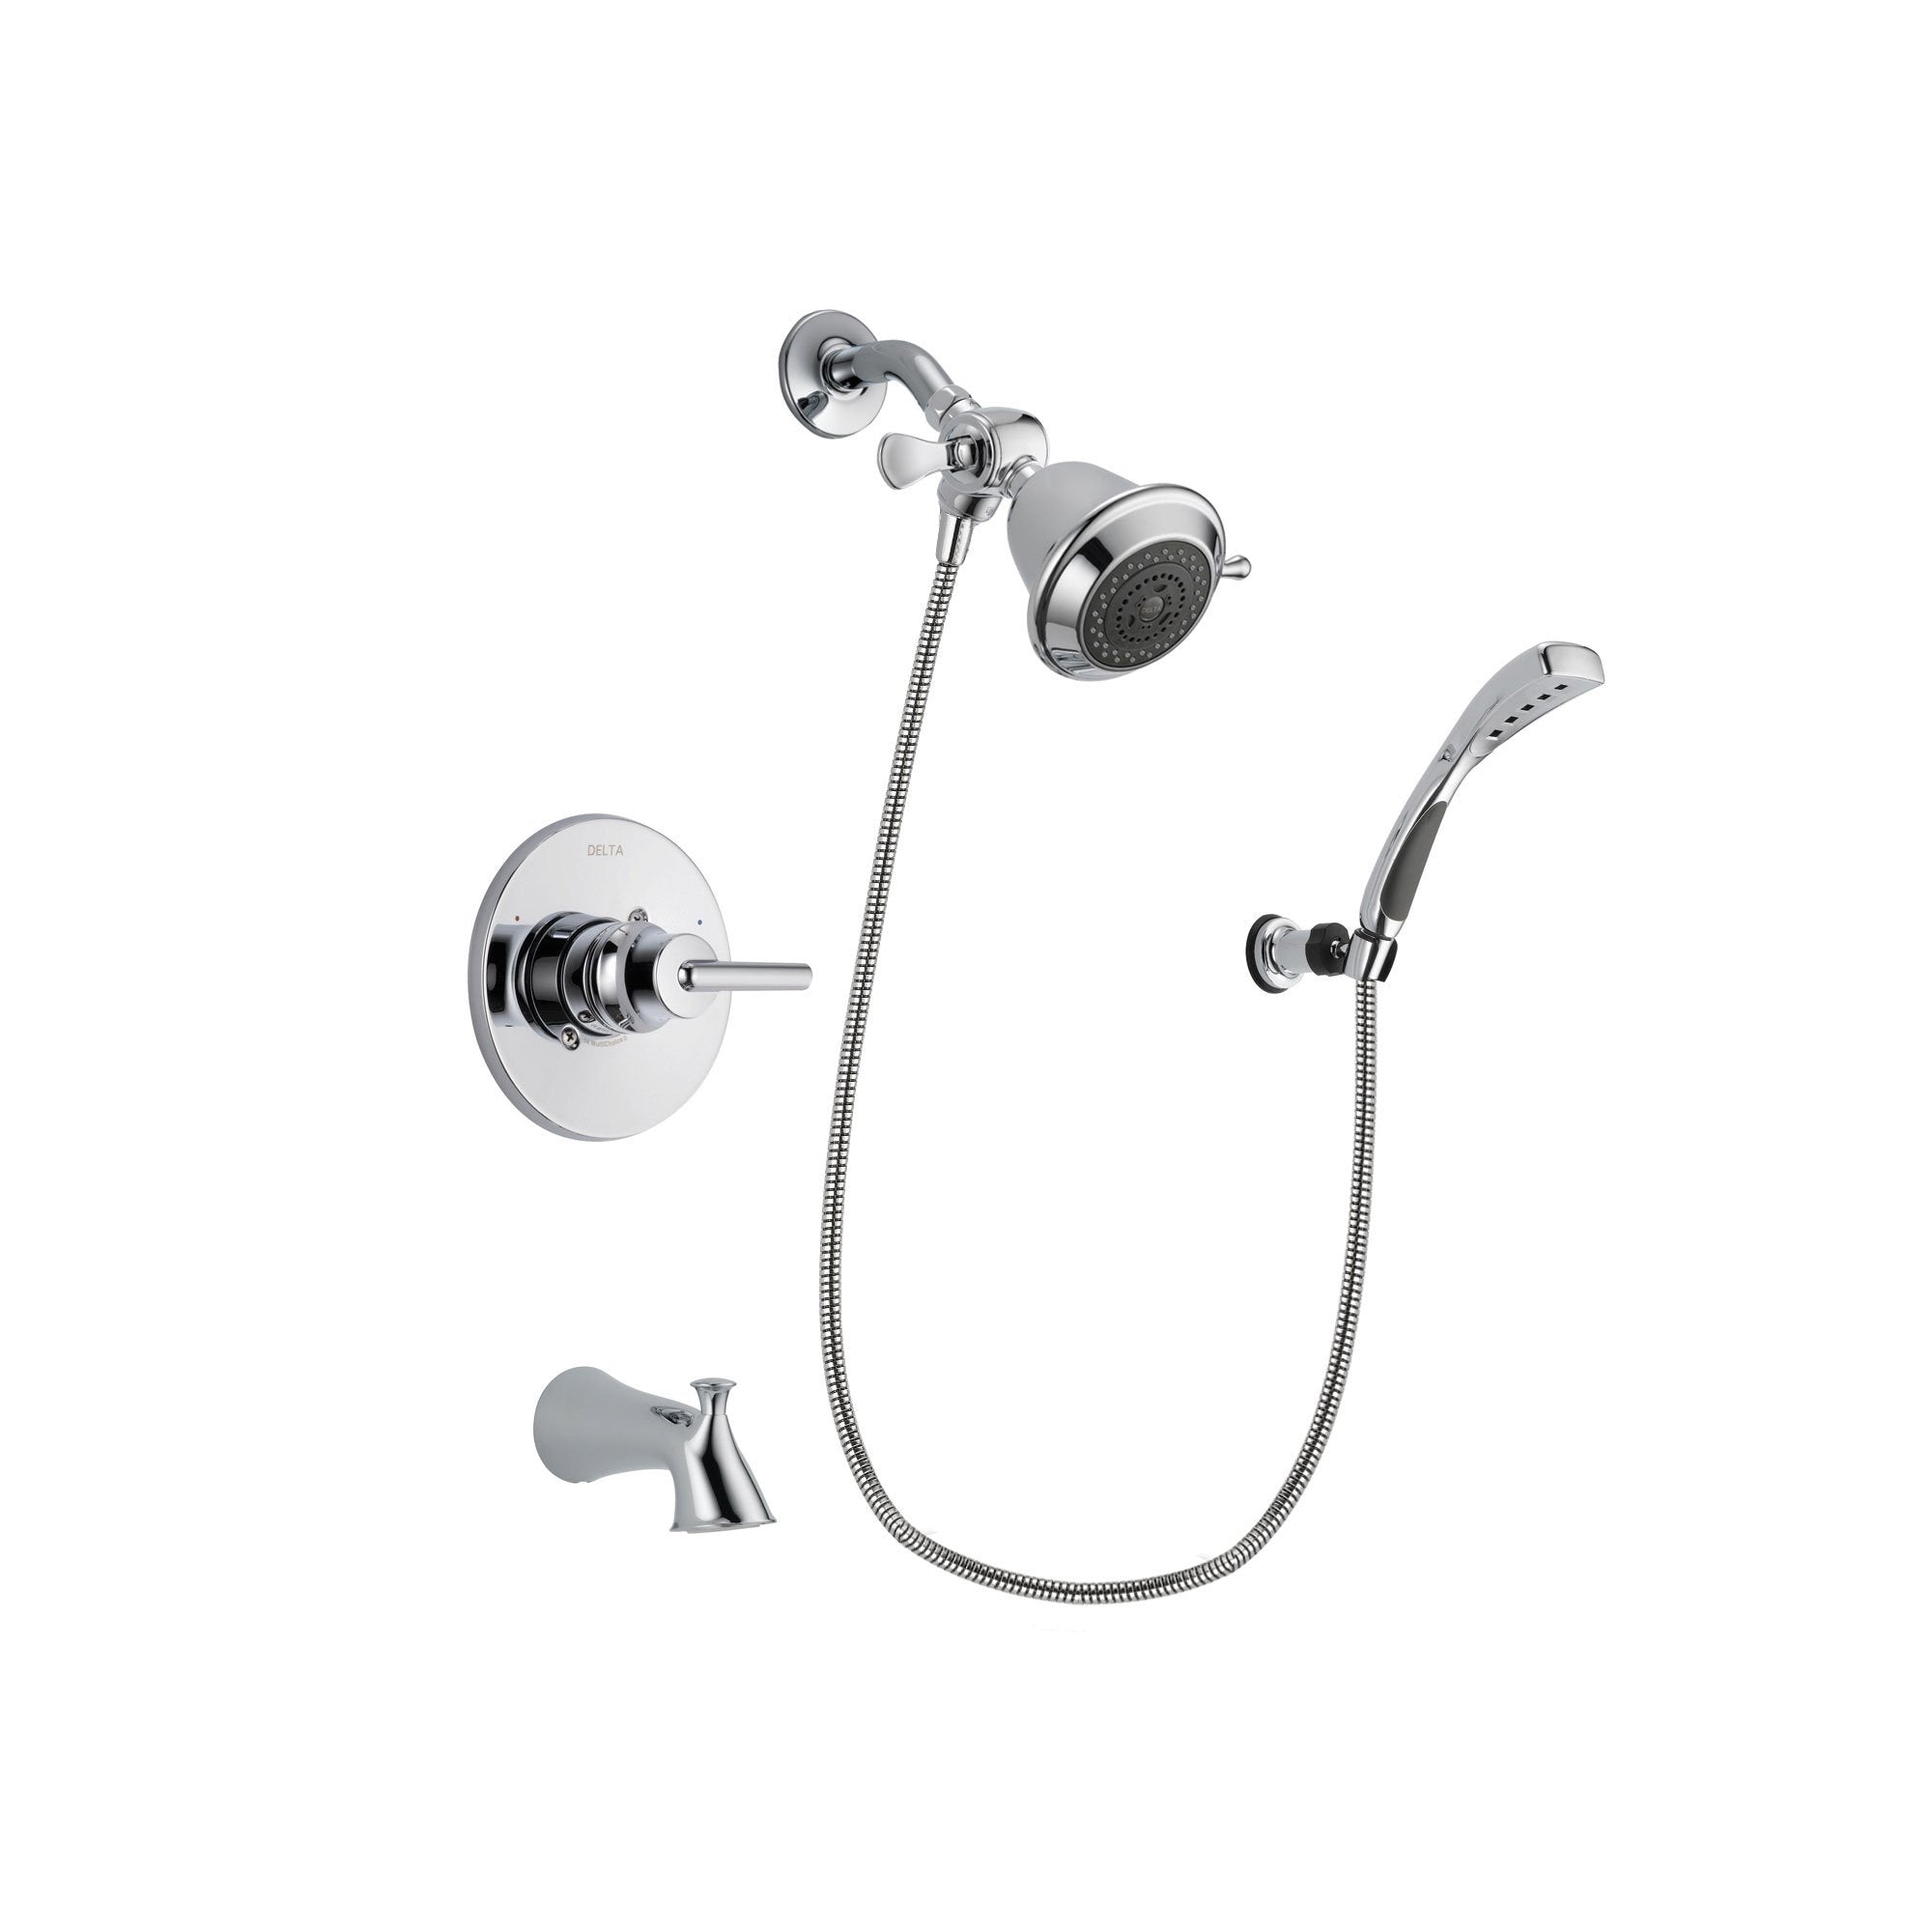 Delta Trinsic Chrome Finish Tub and Shower Faucet System Package with Shower Head and Wall-Mount Bracket with Handheld Shower Spray Includes Rough-in Valve and Tub Spout DSP0981V